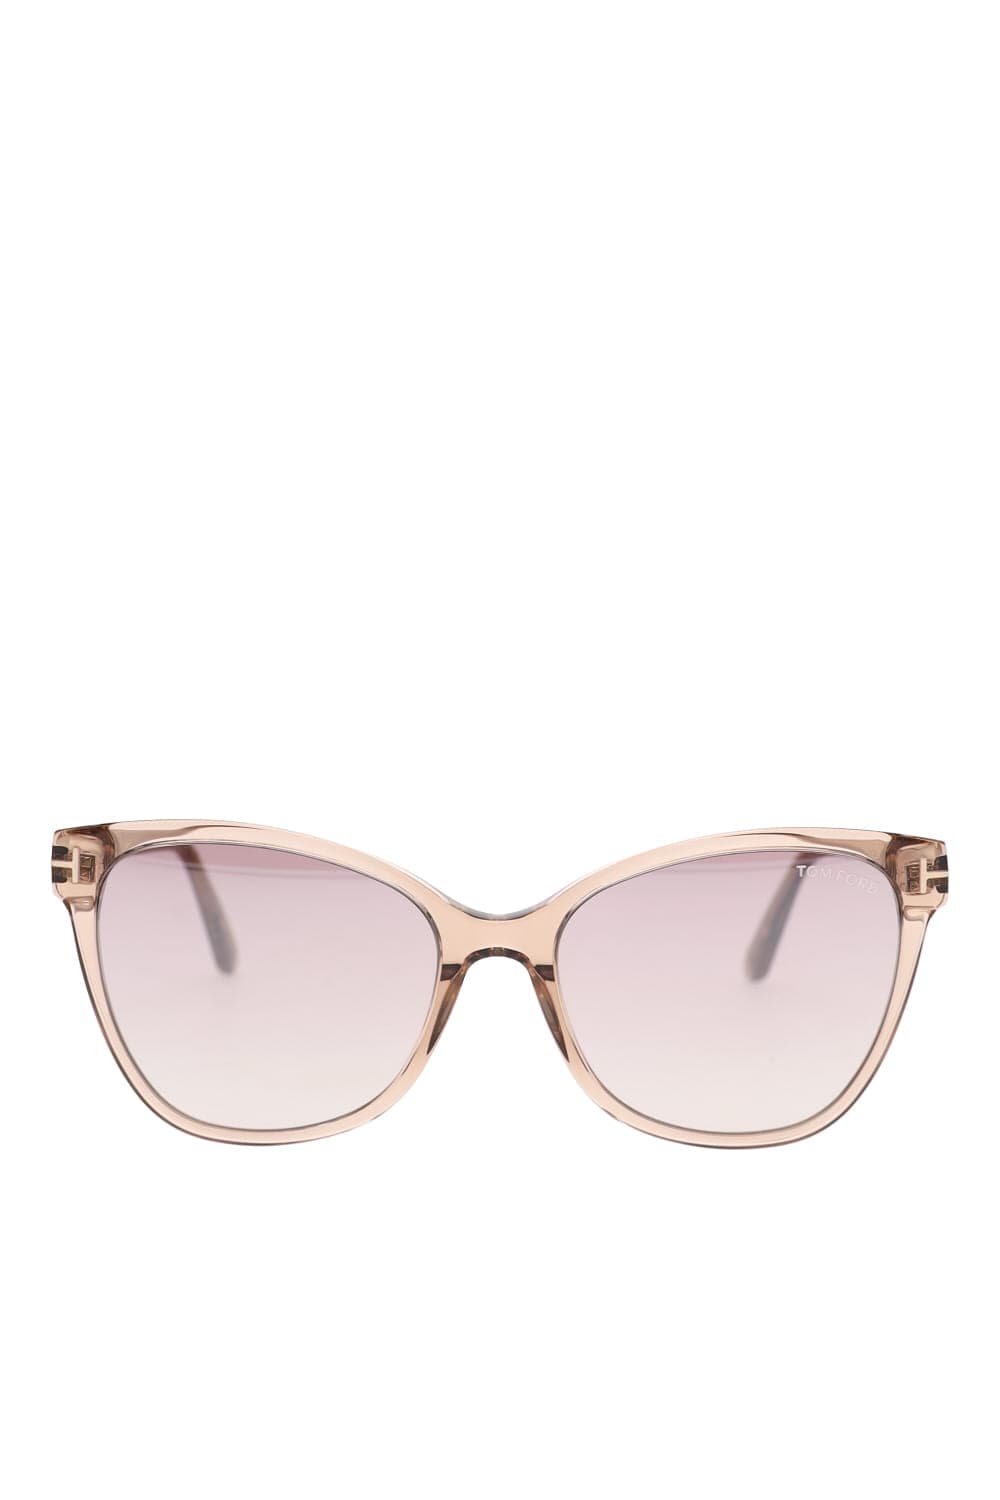 Tom Ford Eyewear FT0844 Rose Champagne Sunglasses FT0844 Rose Champagne/Brown